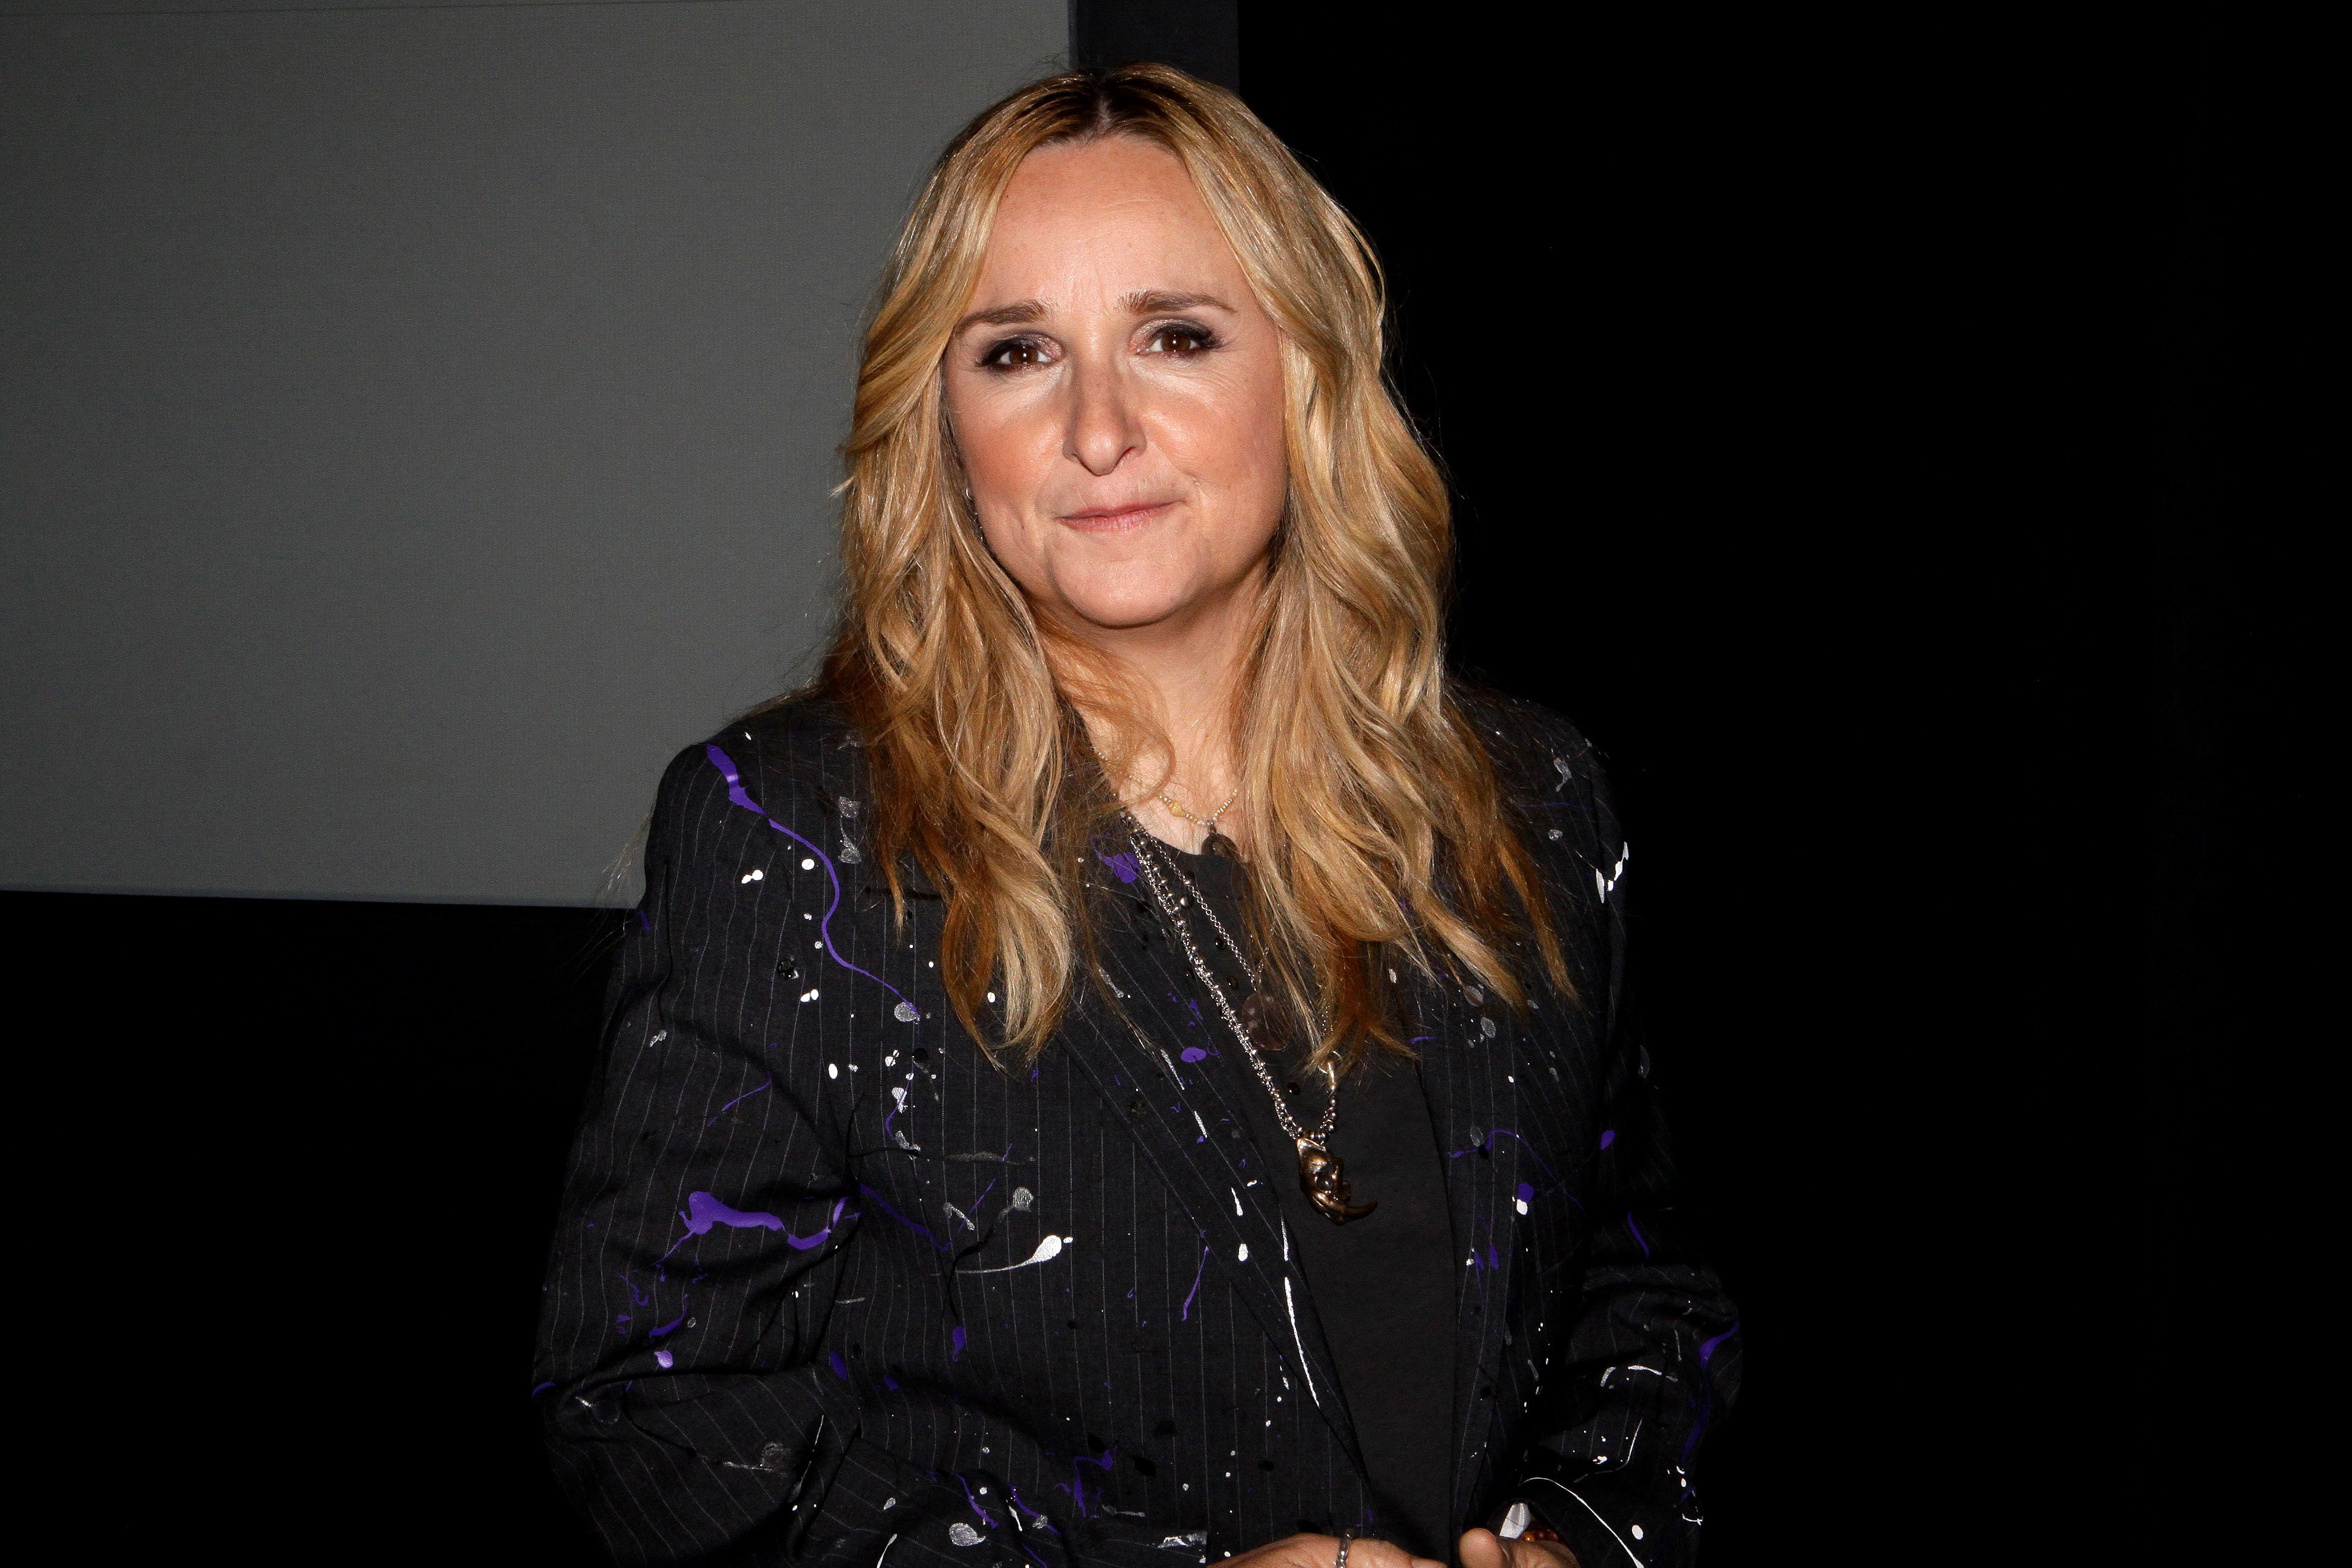 Melissa Etheridge poses for photos during the NARM Awards Dinner Finale at the NARM Convention in Chicago, Illinois, on May 17, 2010. | Source: Getty Images